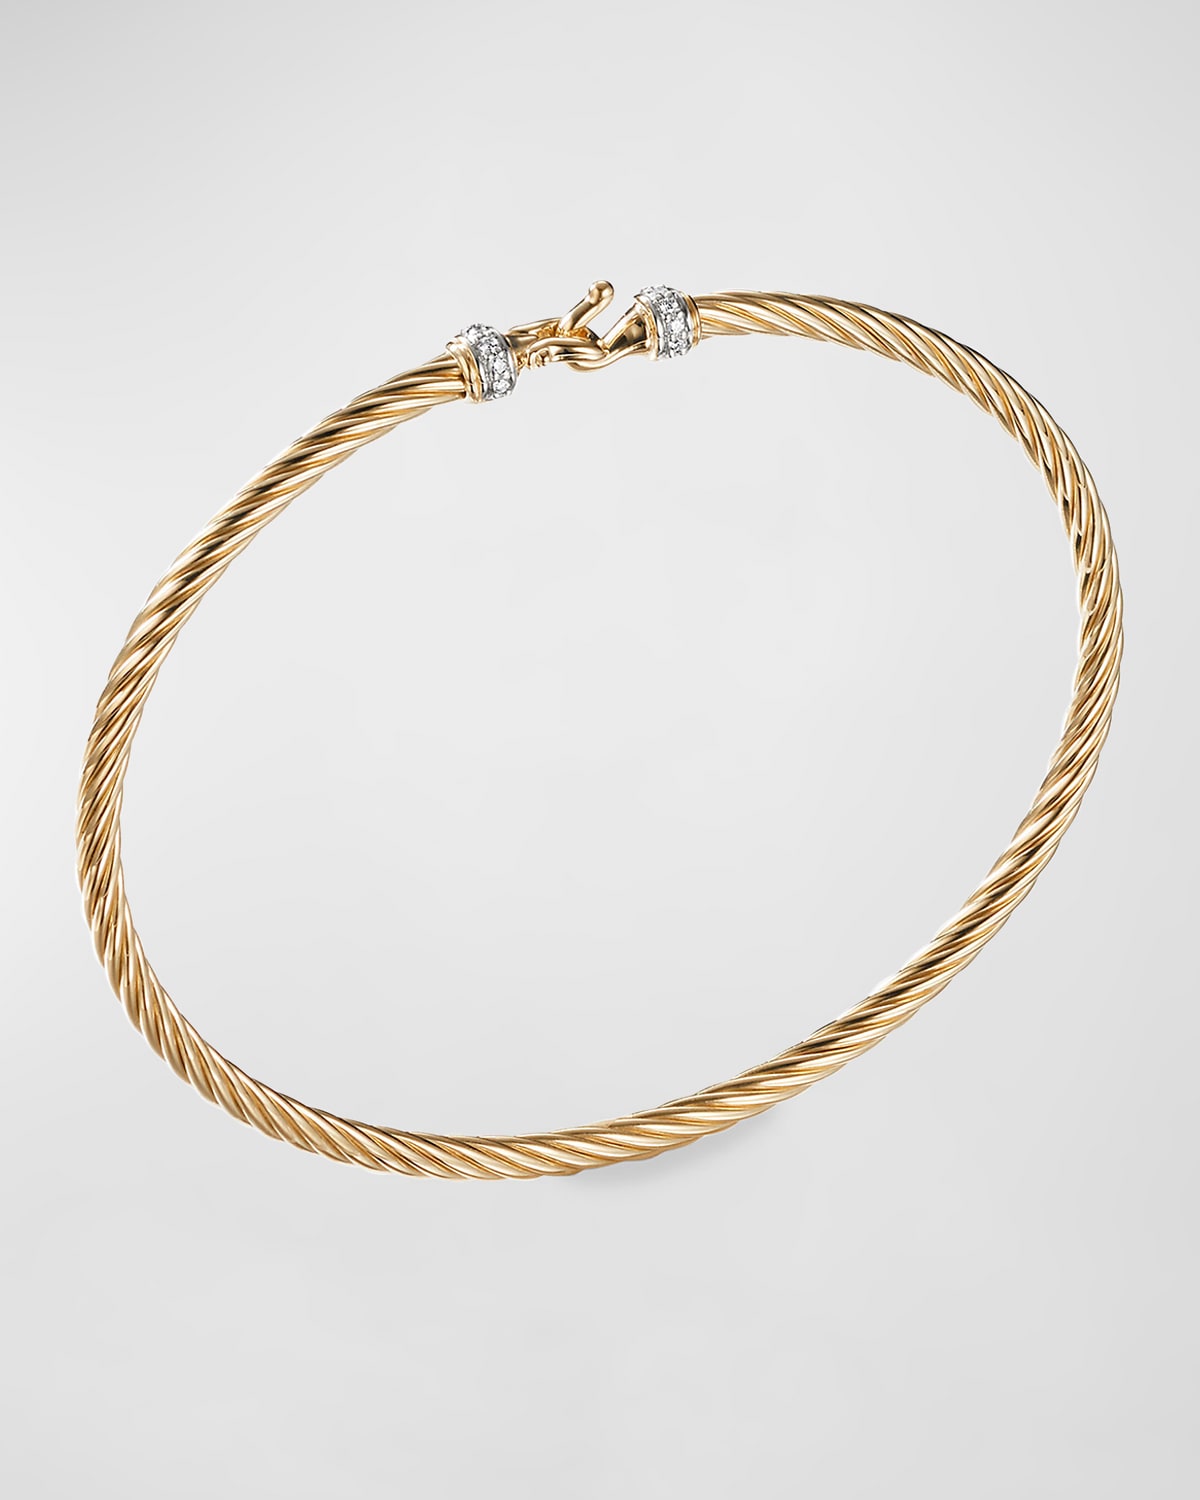 Cable Buckle Bracelet with Diamonds and 18K Gold, 2.6mm, Size S